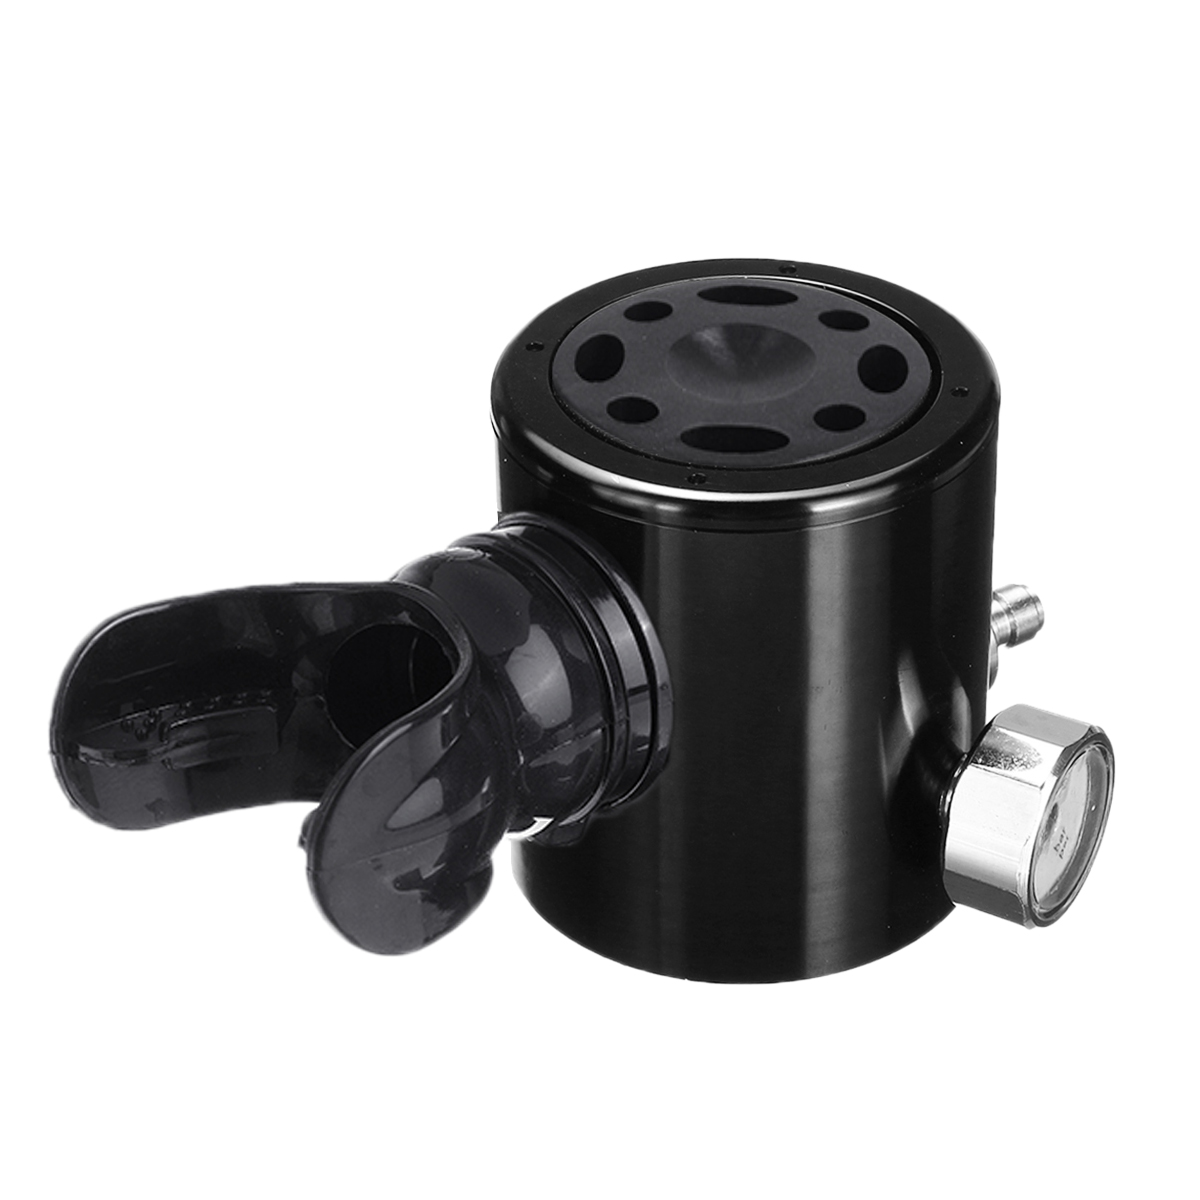 Scuba-Oxygen-Air-Tank-Diving-Equipment-Breathing-Underwater-Breathing-Refill-Adapter-Valve-Head-Mout-1561062-8